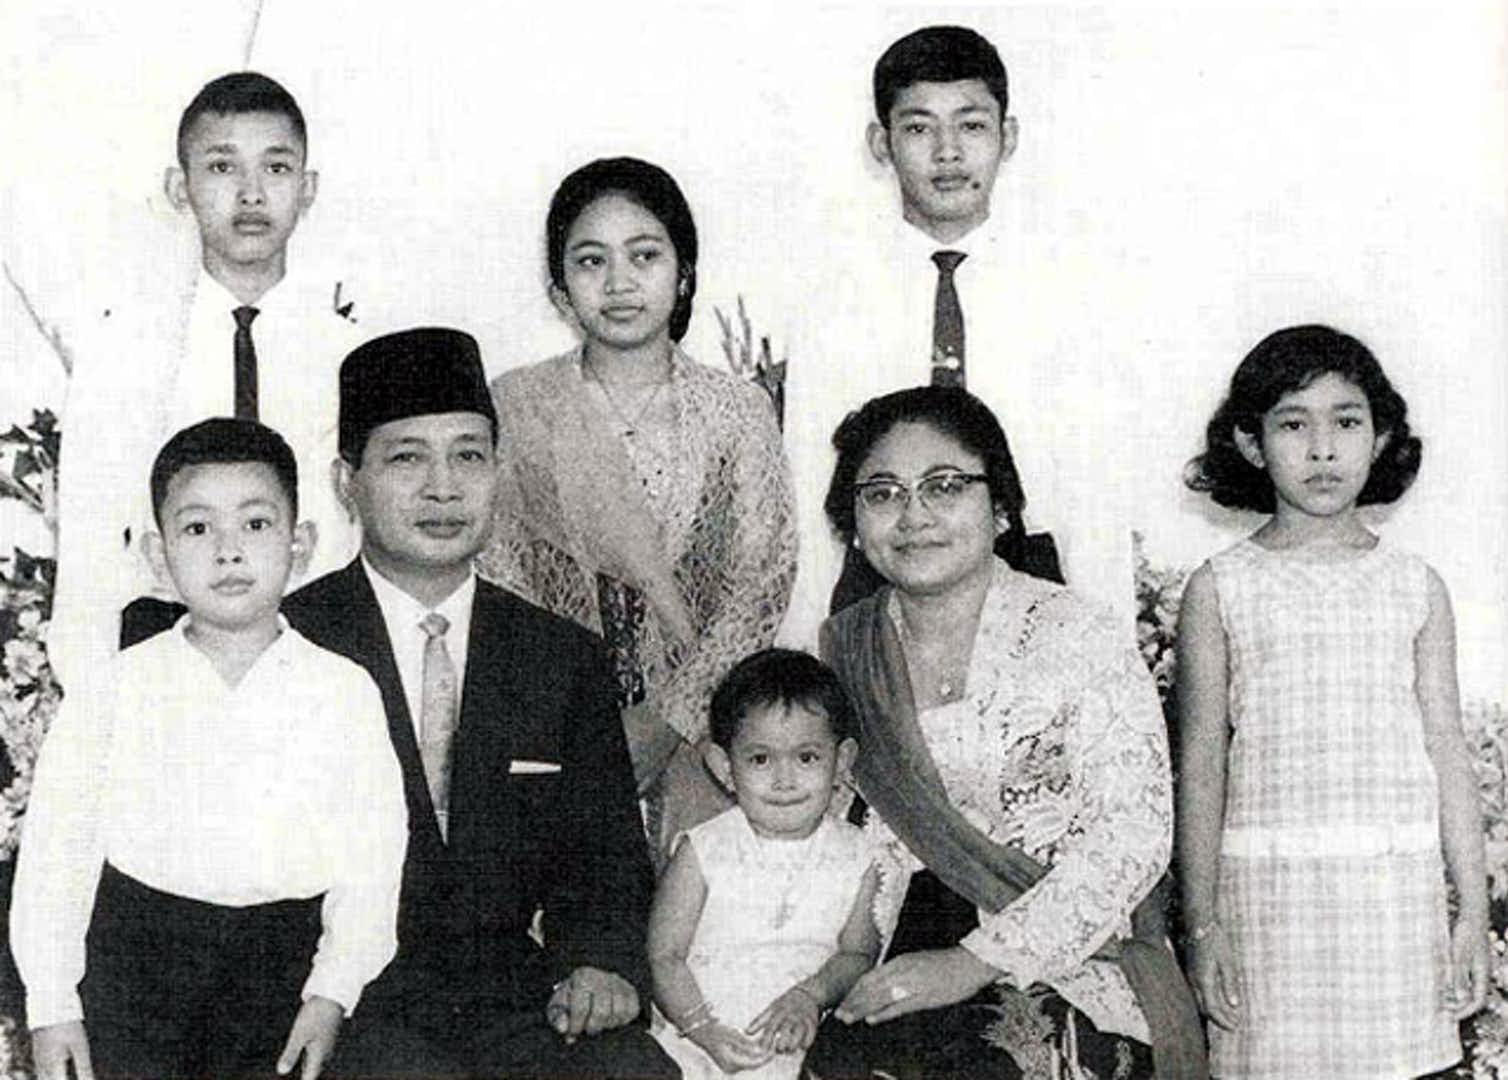 A black and white formal style portrait of Soeharto and his young family